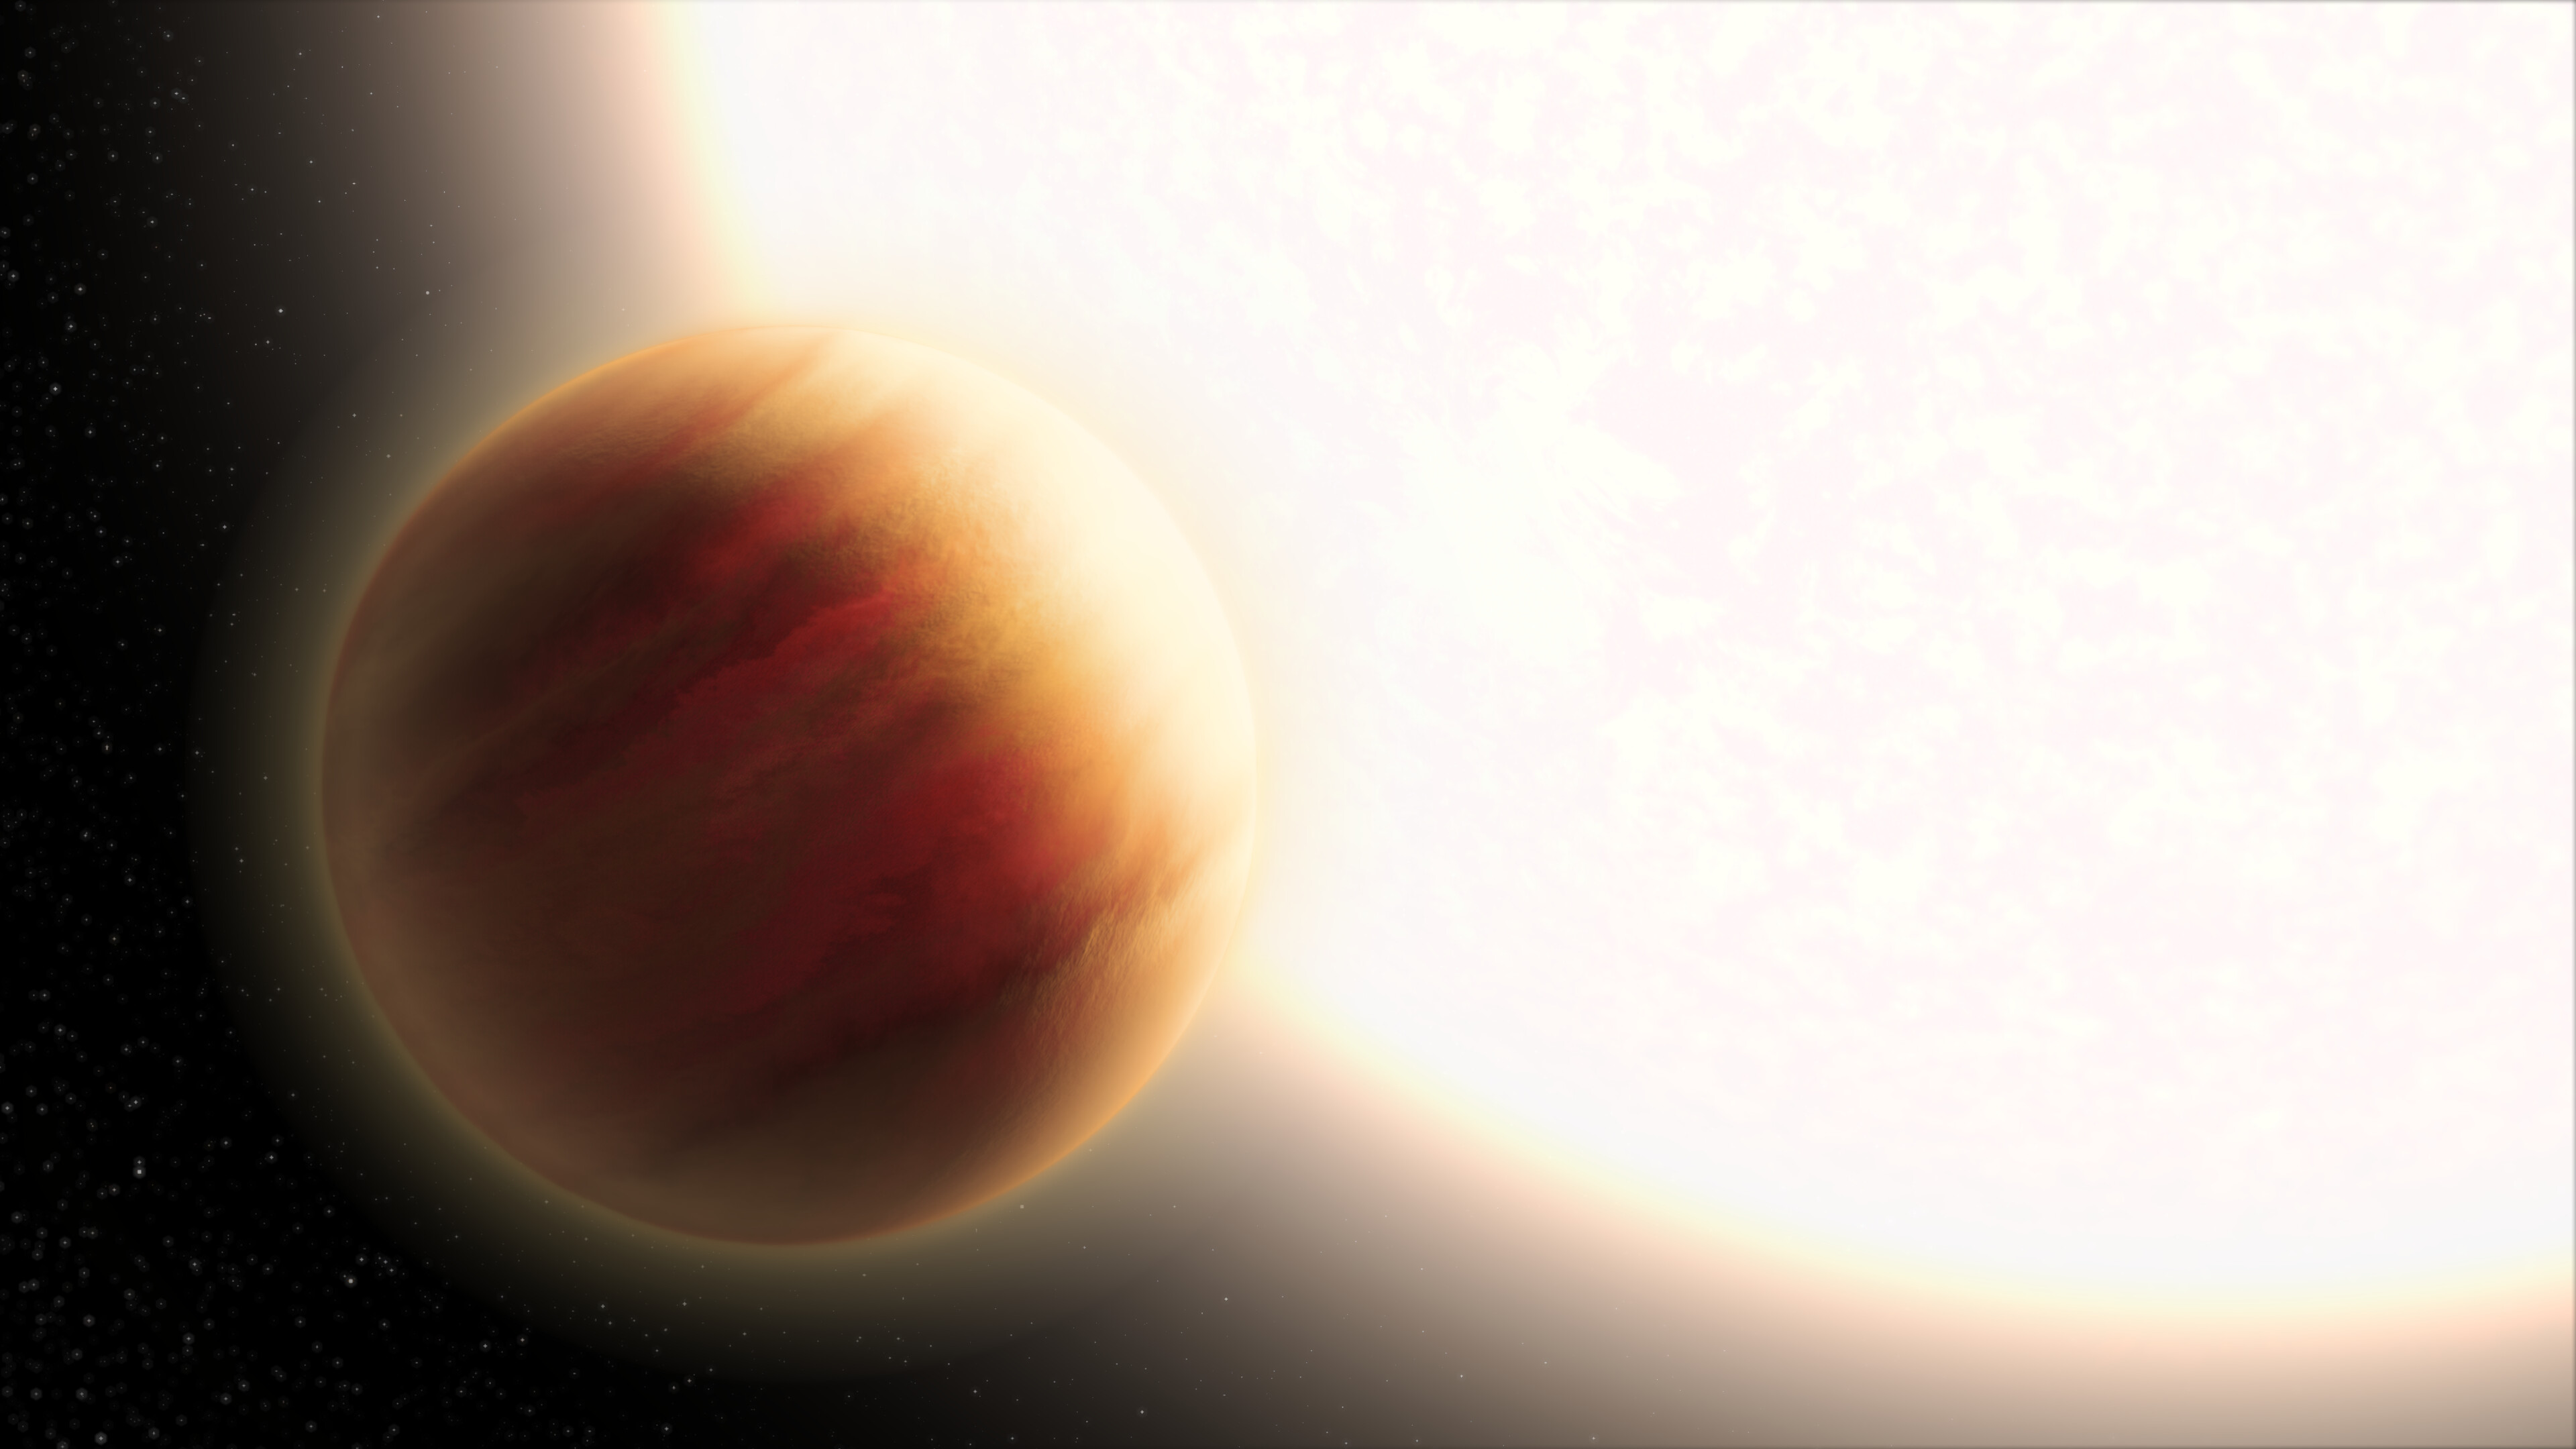 Exoplanet’s Atmospheric Composition Measured